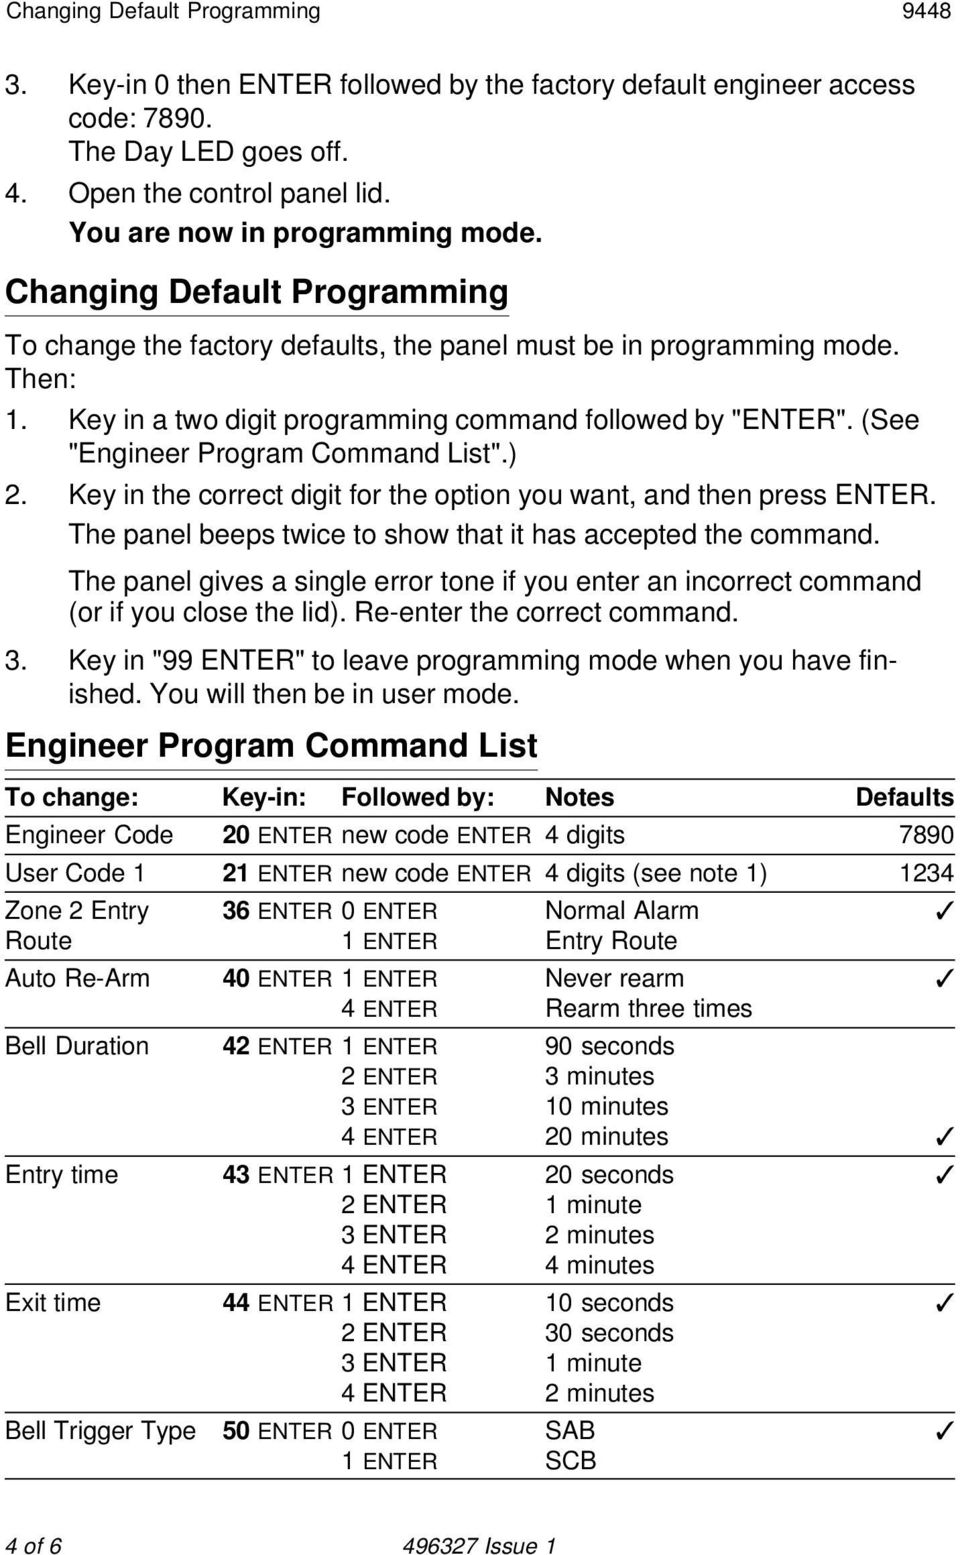 Key in a two digit programming command followed by "ENTER". (See "Engineer Program Command List".) 2. Key in the correct digit for the option you want, and then press ENTER.